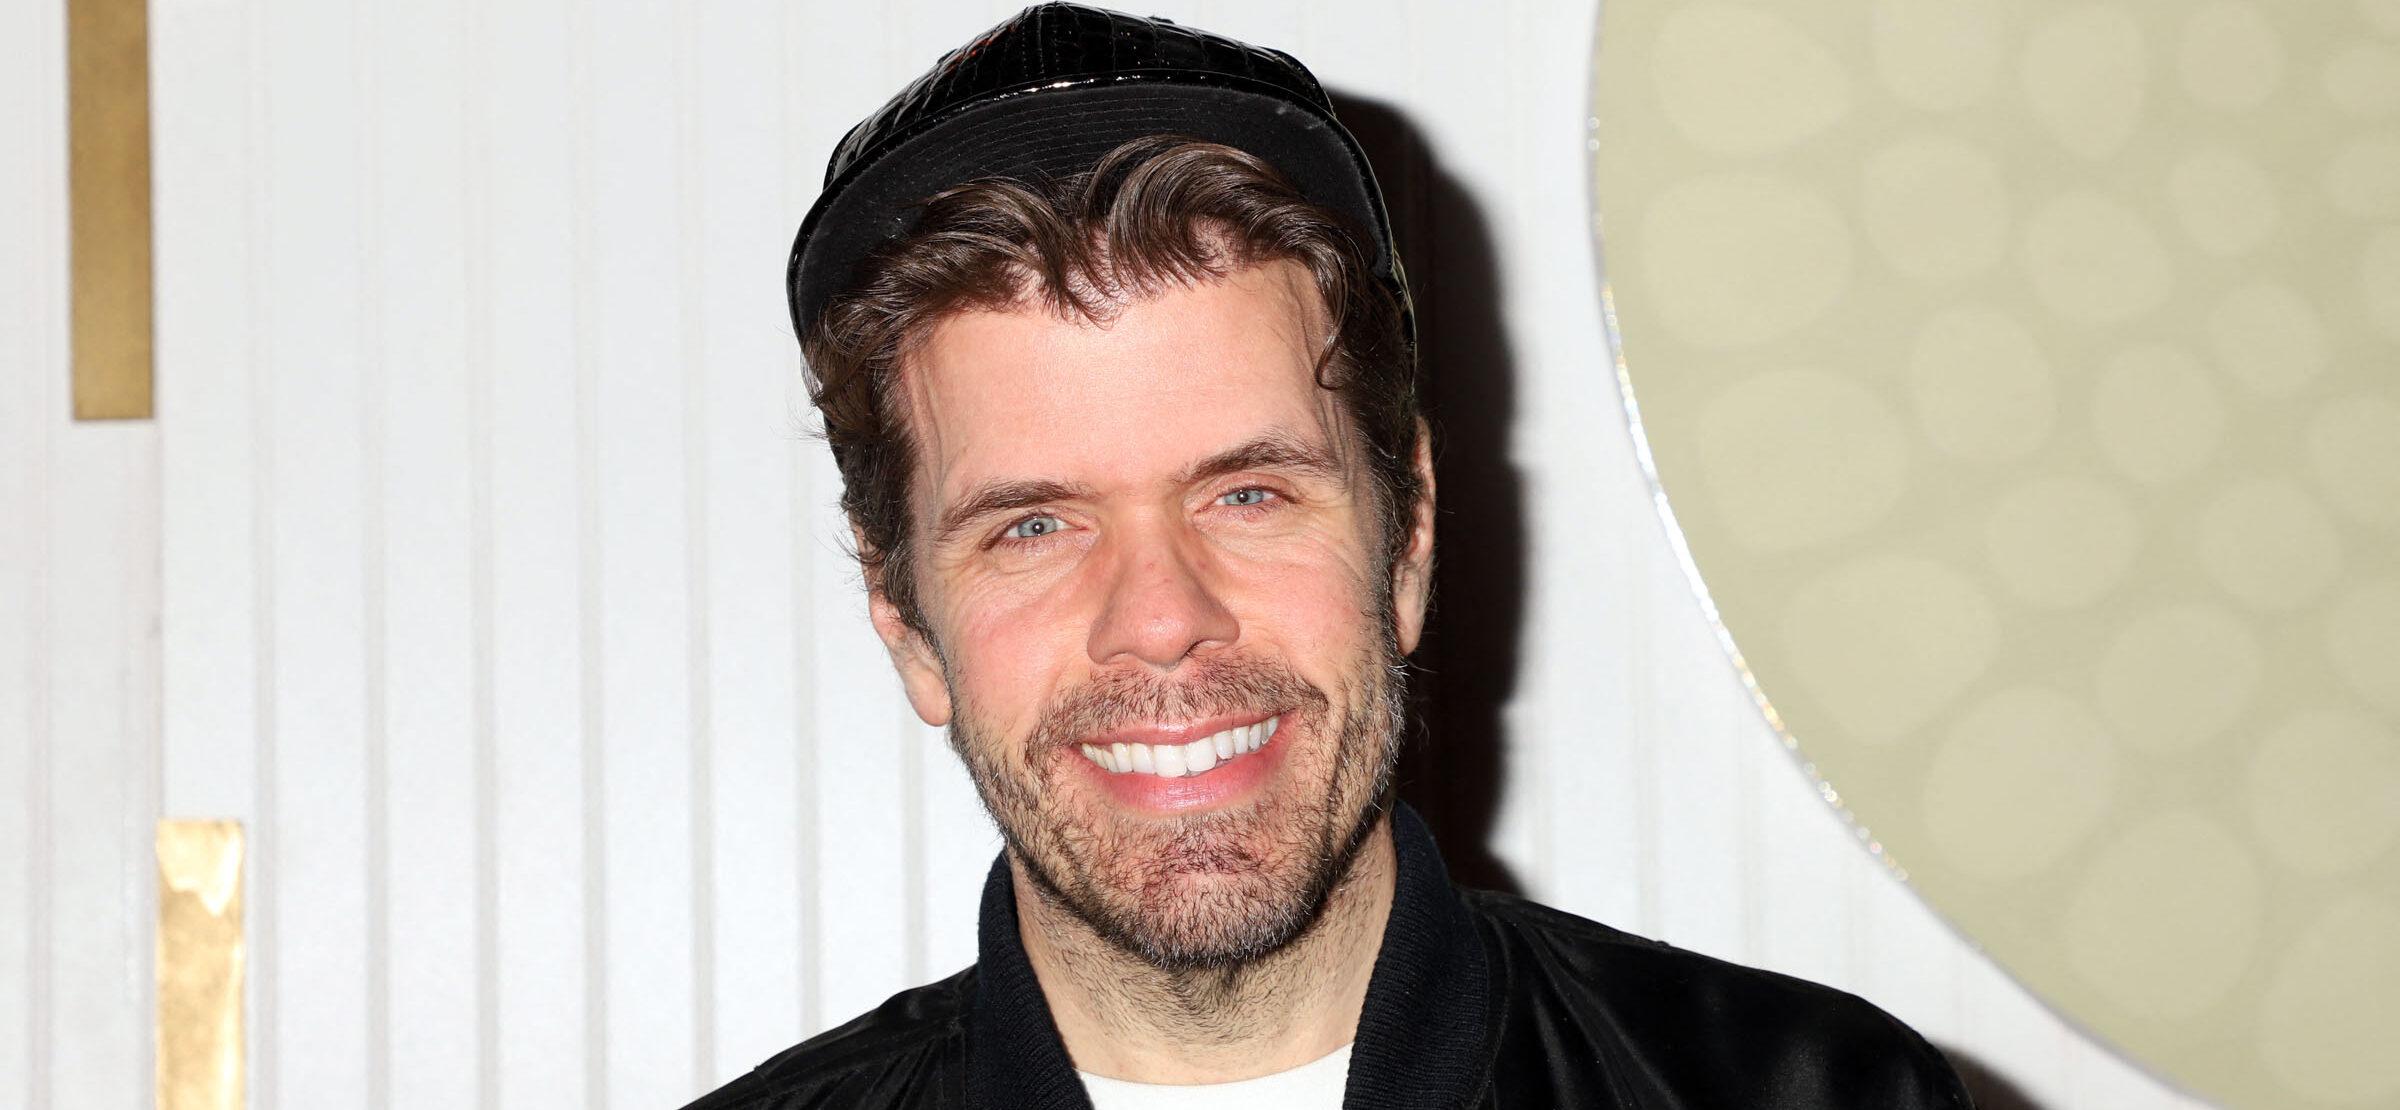 Perez Hilton Dishes On Early Days Of His Controversial 20-Year Career